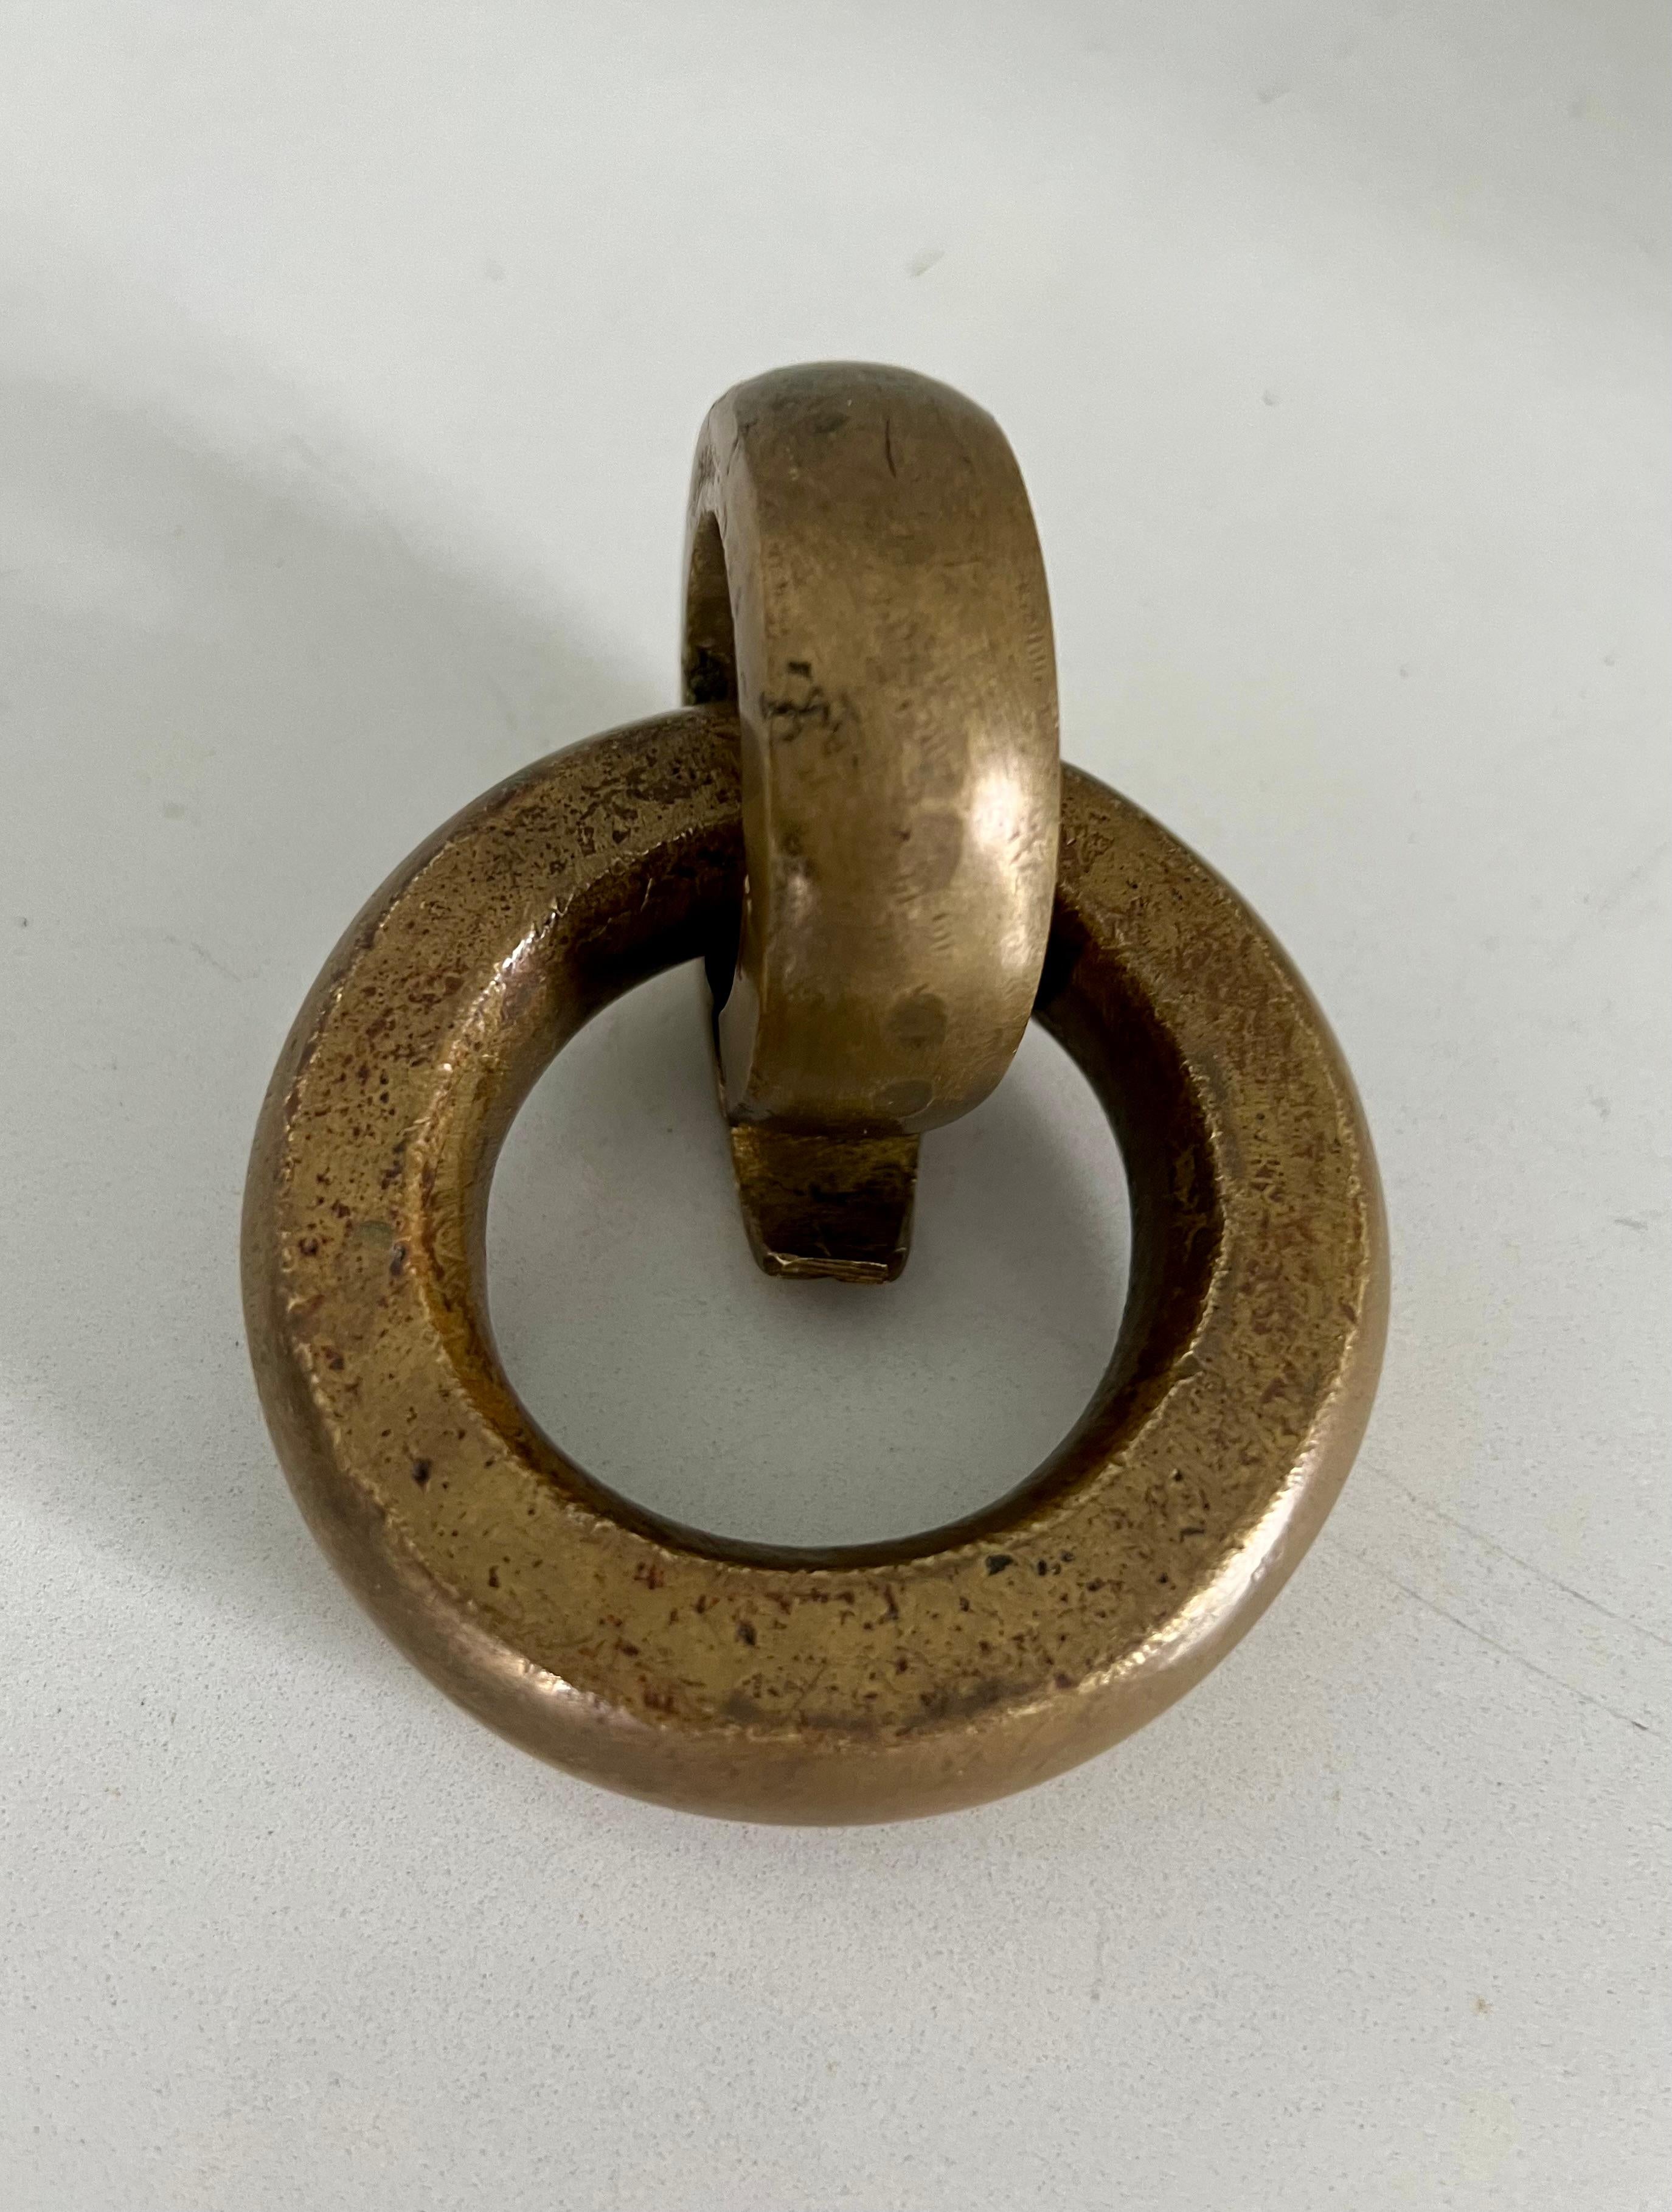 Gorgeous architectural element with good weight. This piece consists of two interlocking bronze loops. Can be used as a paperweight for mail or documents. A great piece for a home office or entry table.